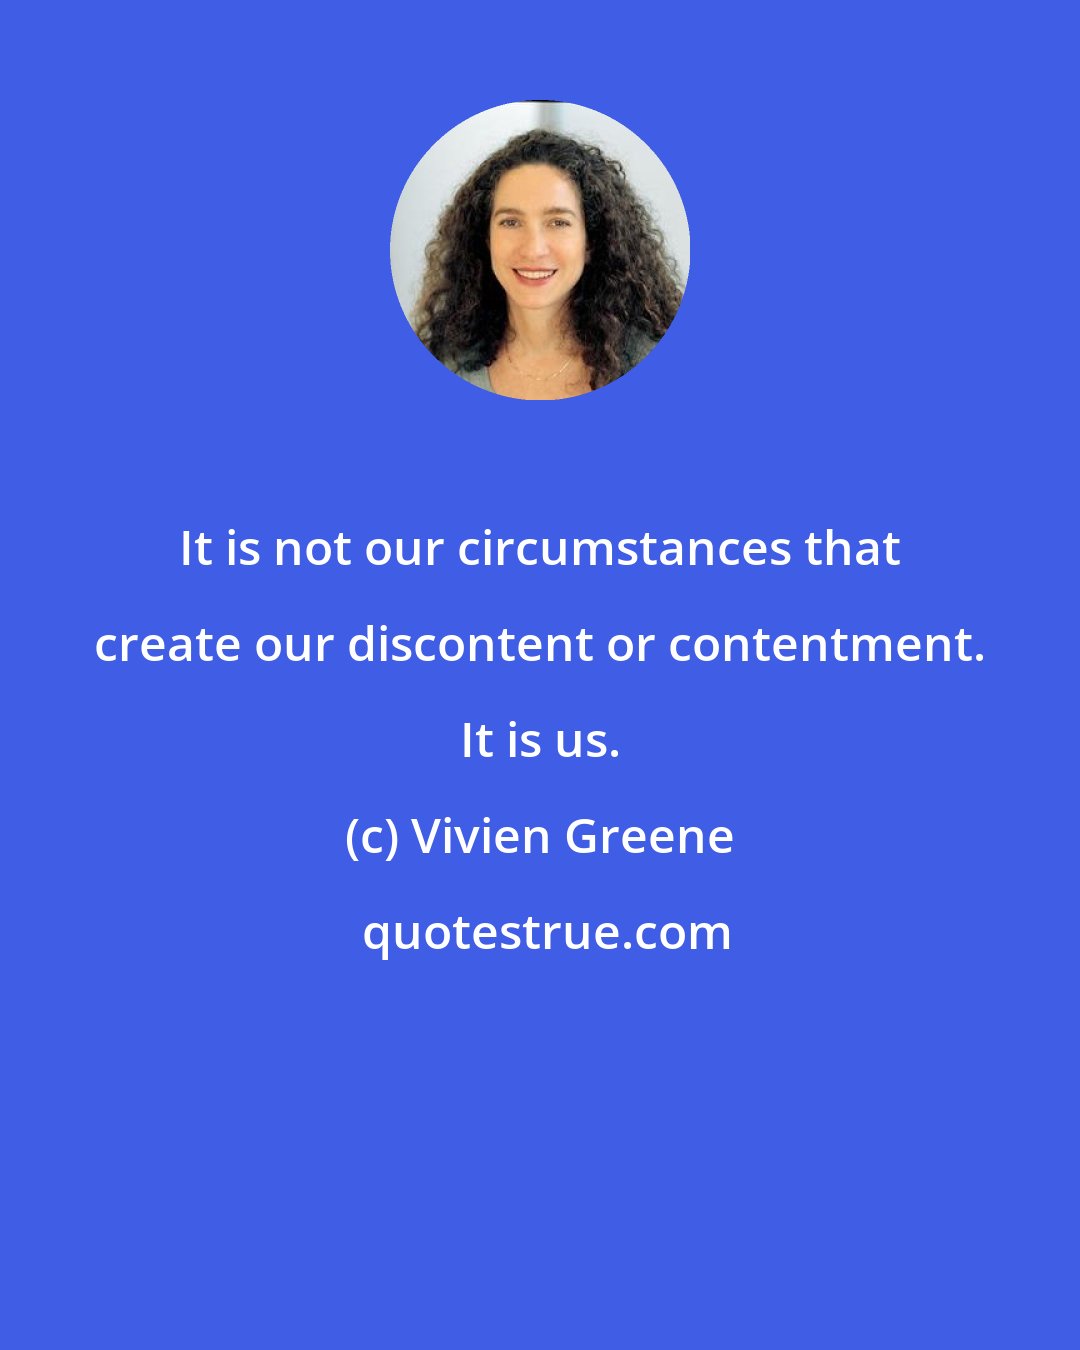 Vivien Greene: It is not our circumstances that create our discontent or contentment. It is us.